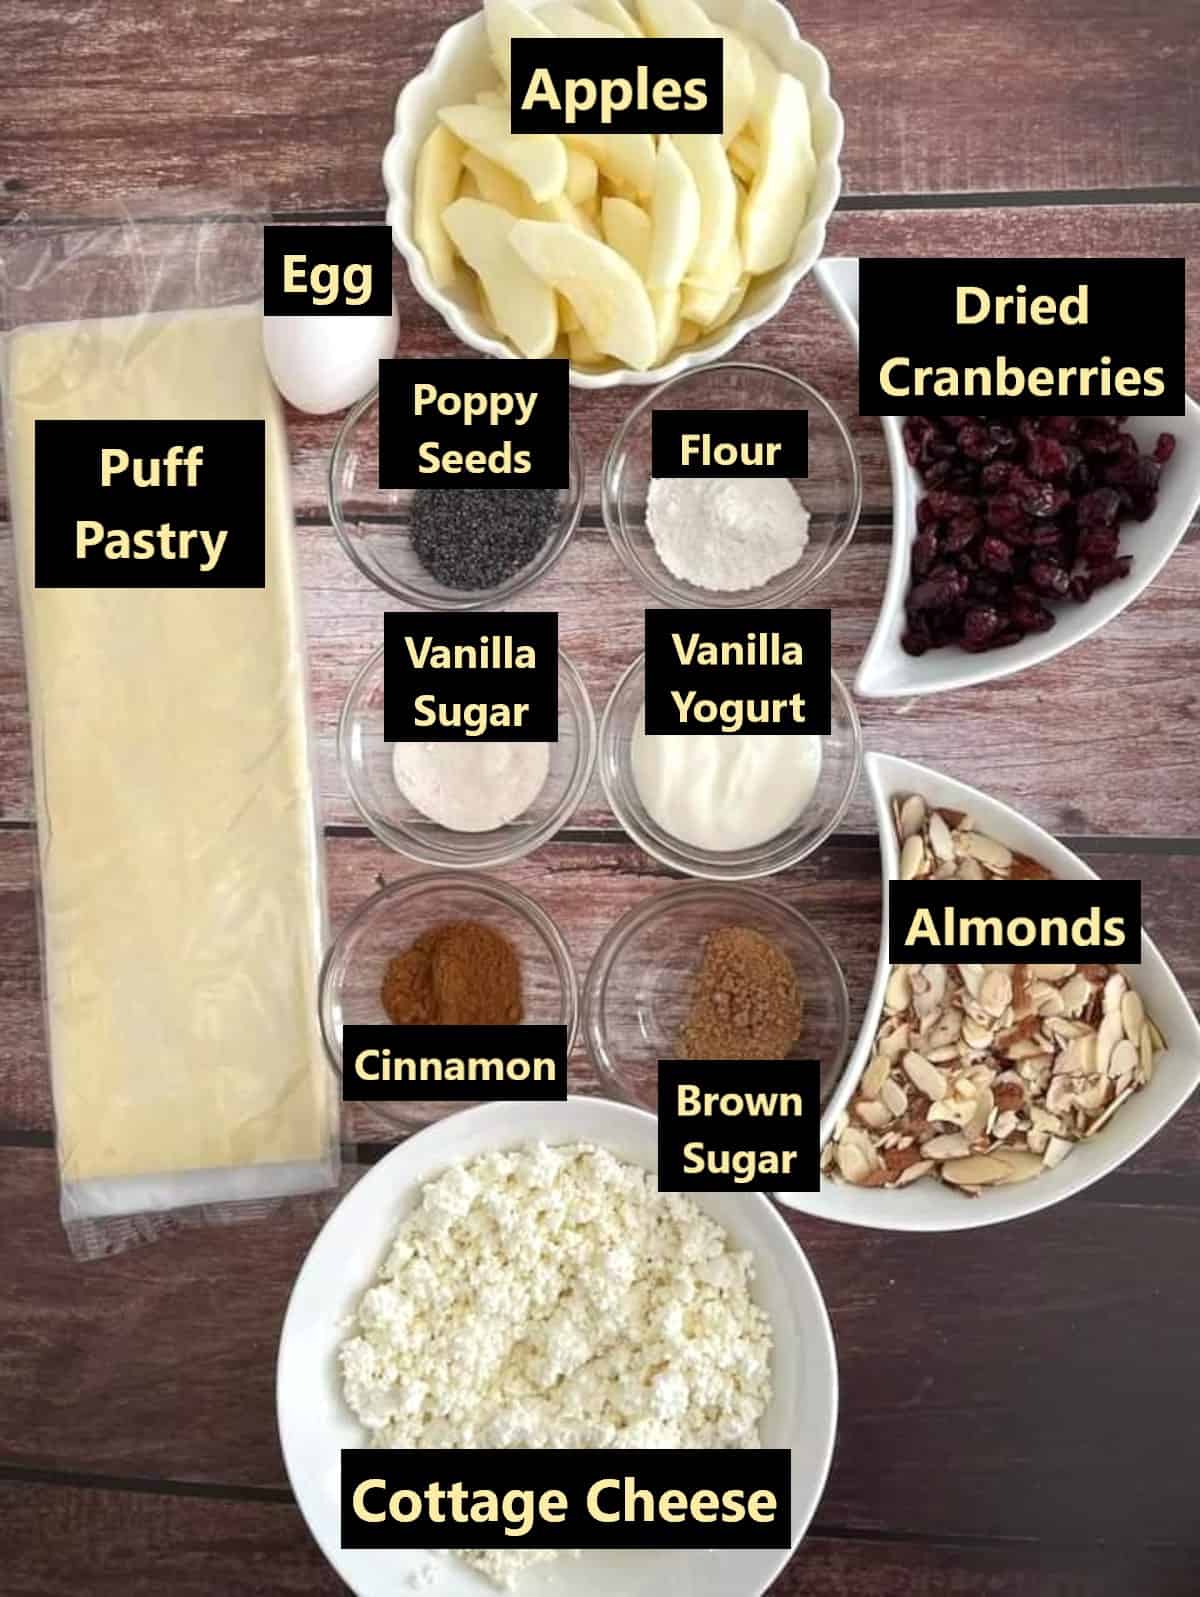 Cottage cheese and apple pie-all ingredients labeled